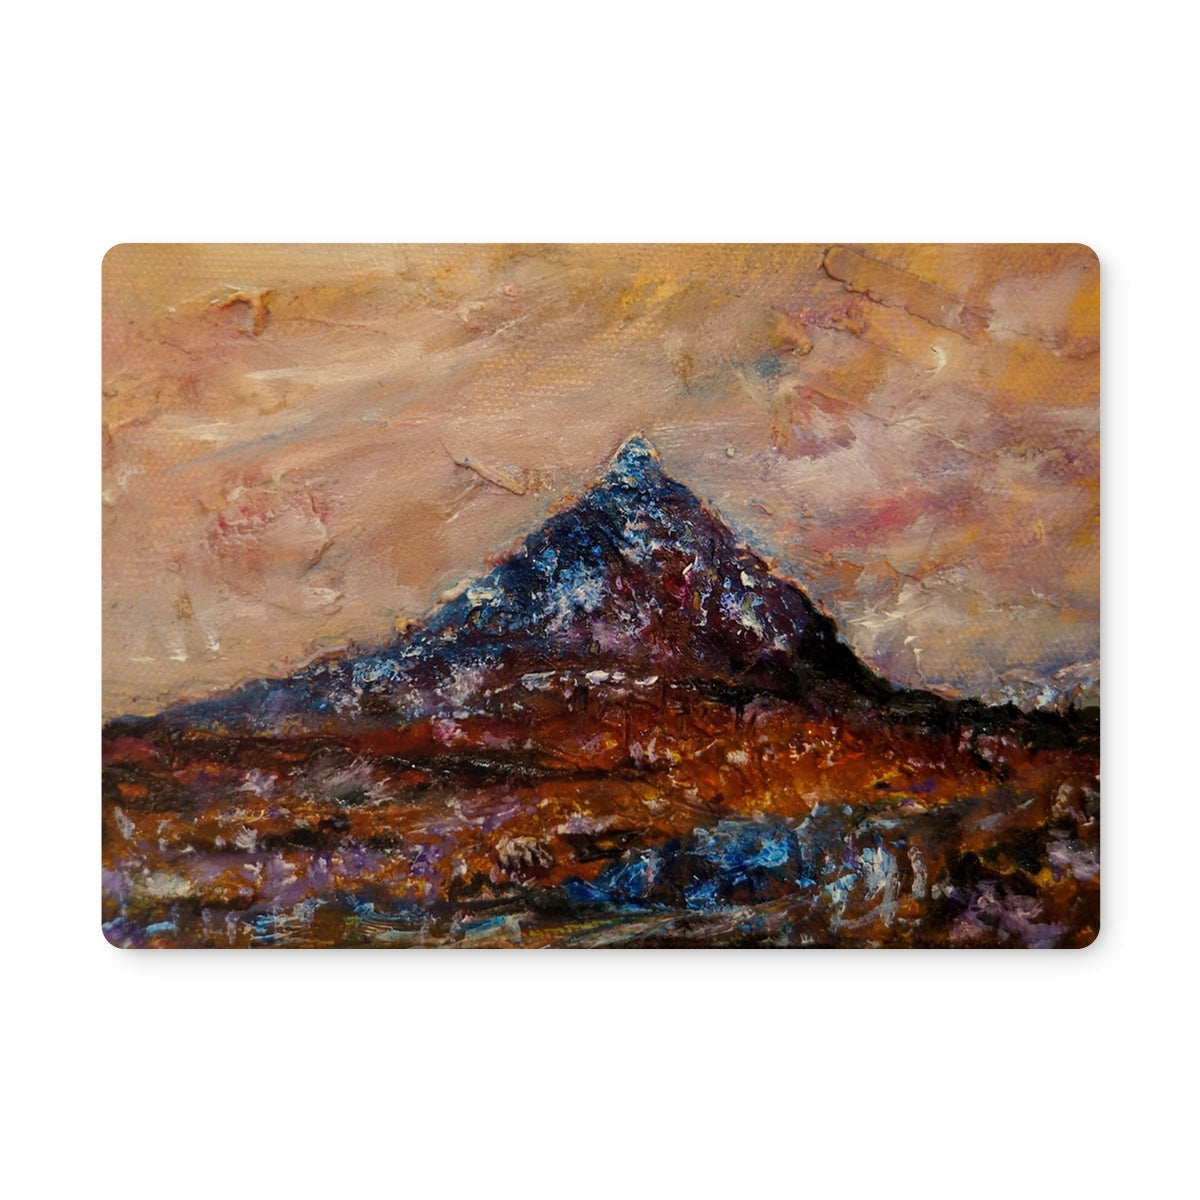 Buachaille Etive Mòr Art Gifts Placemat-Placemats-Glencoe Art Gallery-4 Placemats-Paintings, Prints, Homeware, Art Gifts From Scotland By Scottish Artist Kevin Hunter